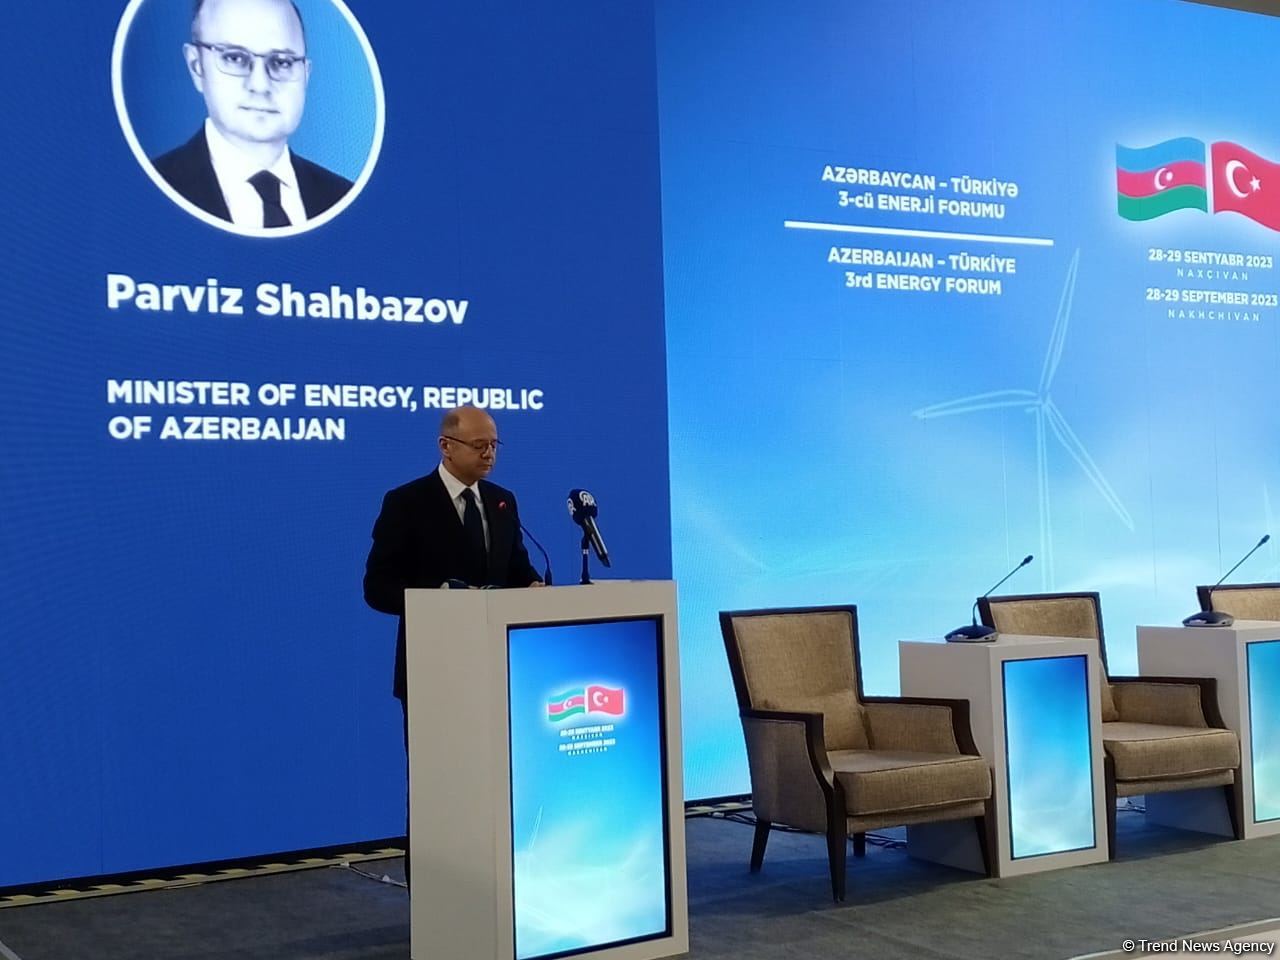 Azerbaijan cooperates with global leaders in renewables to promote green energy countrywide